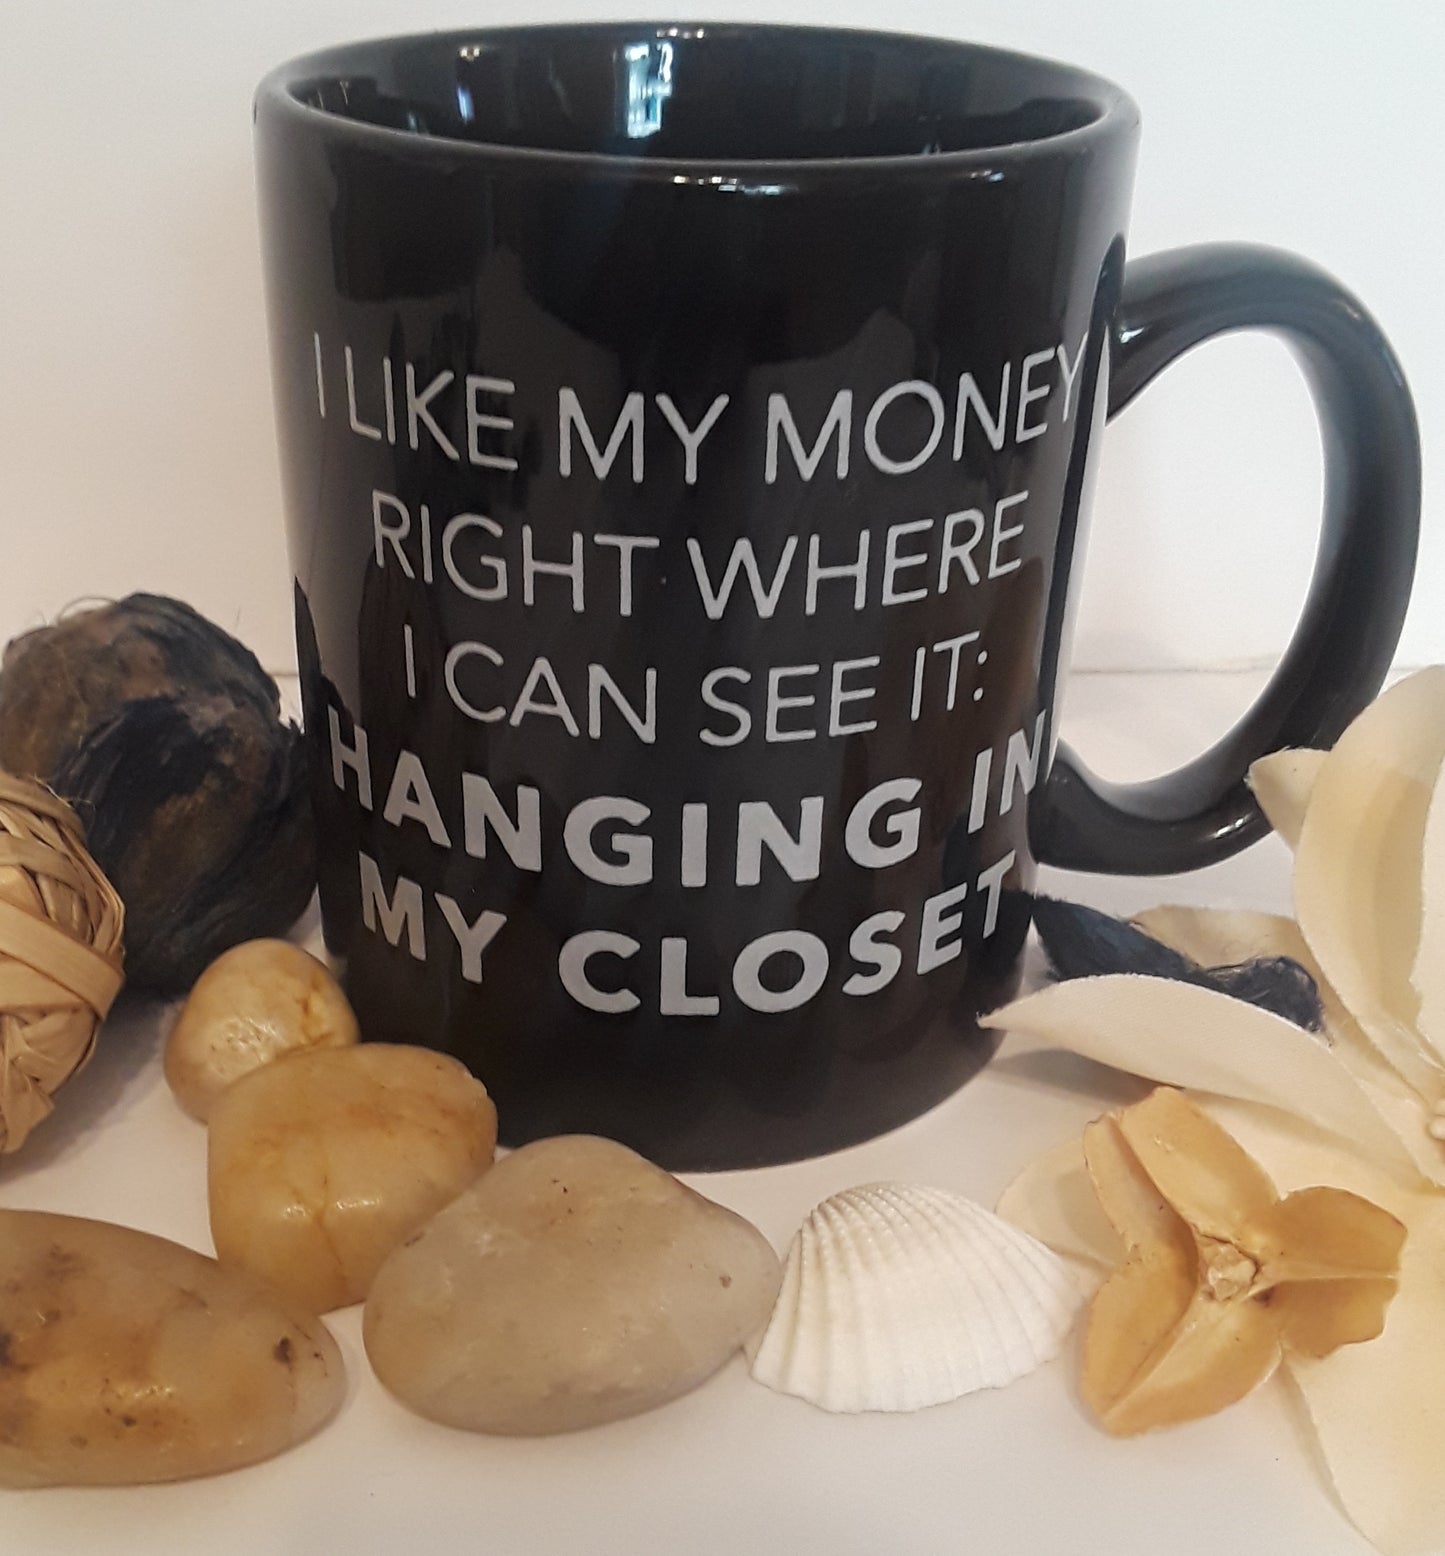 I Like My Money Right Where I Can See It: Hanging In My Closet Mug 16oz